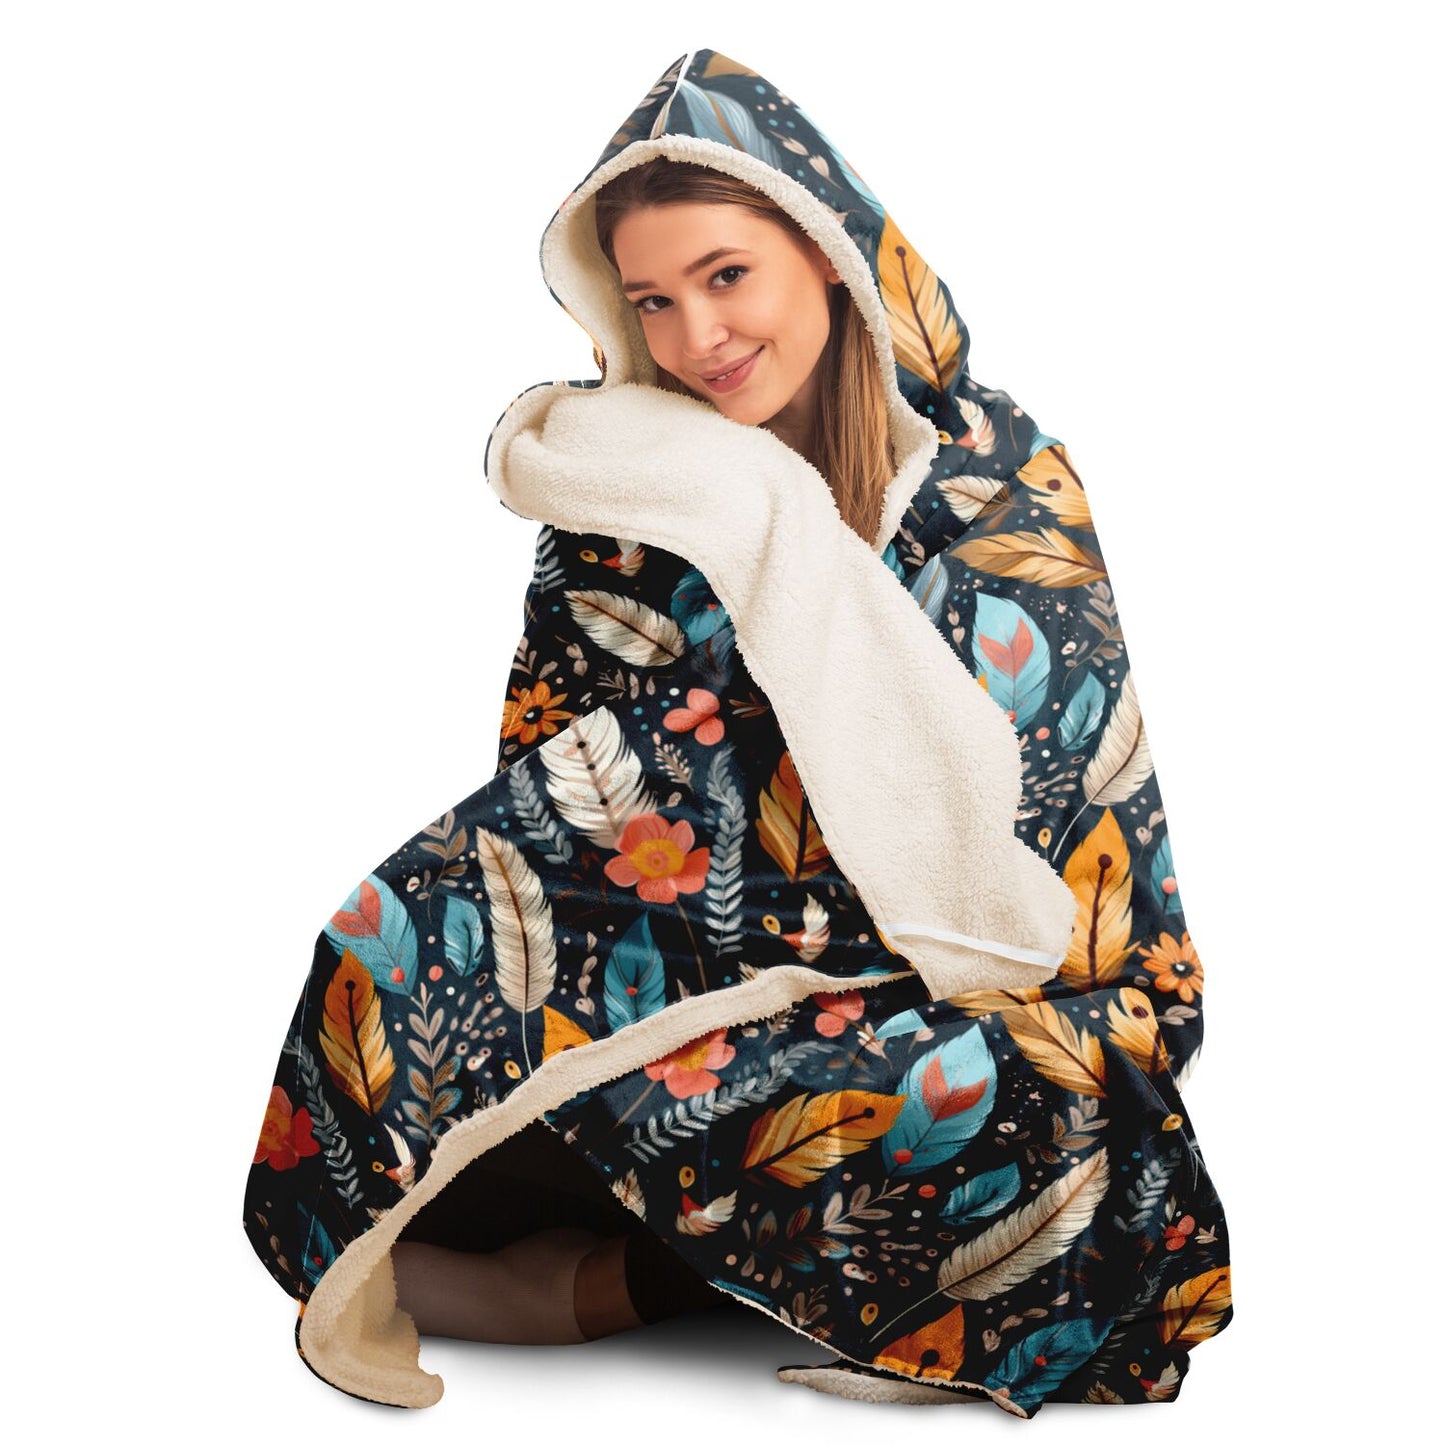 Native American Indian Feathers Hooded Blanket - All Over Print Hooded Throw